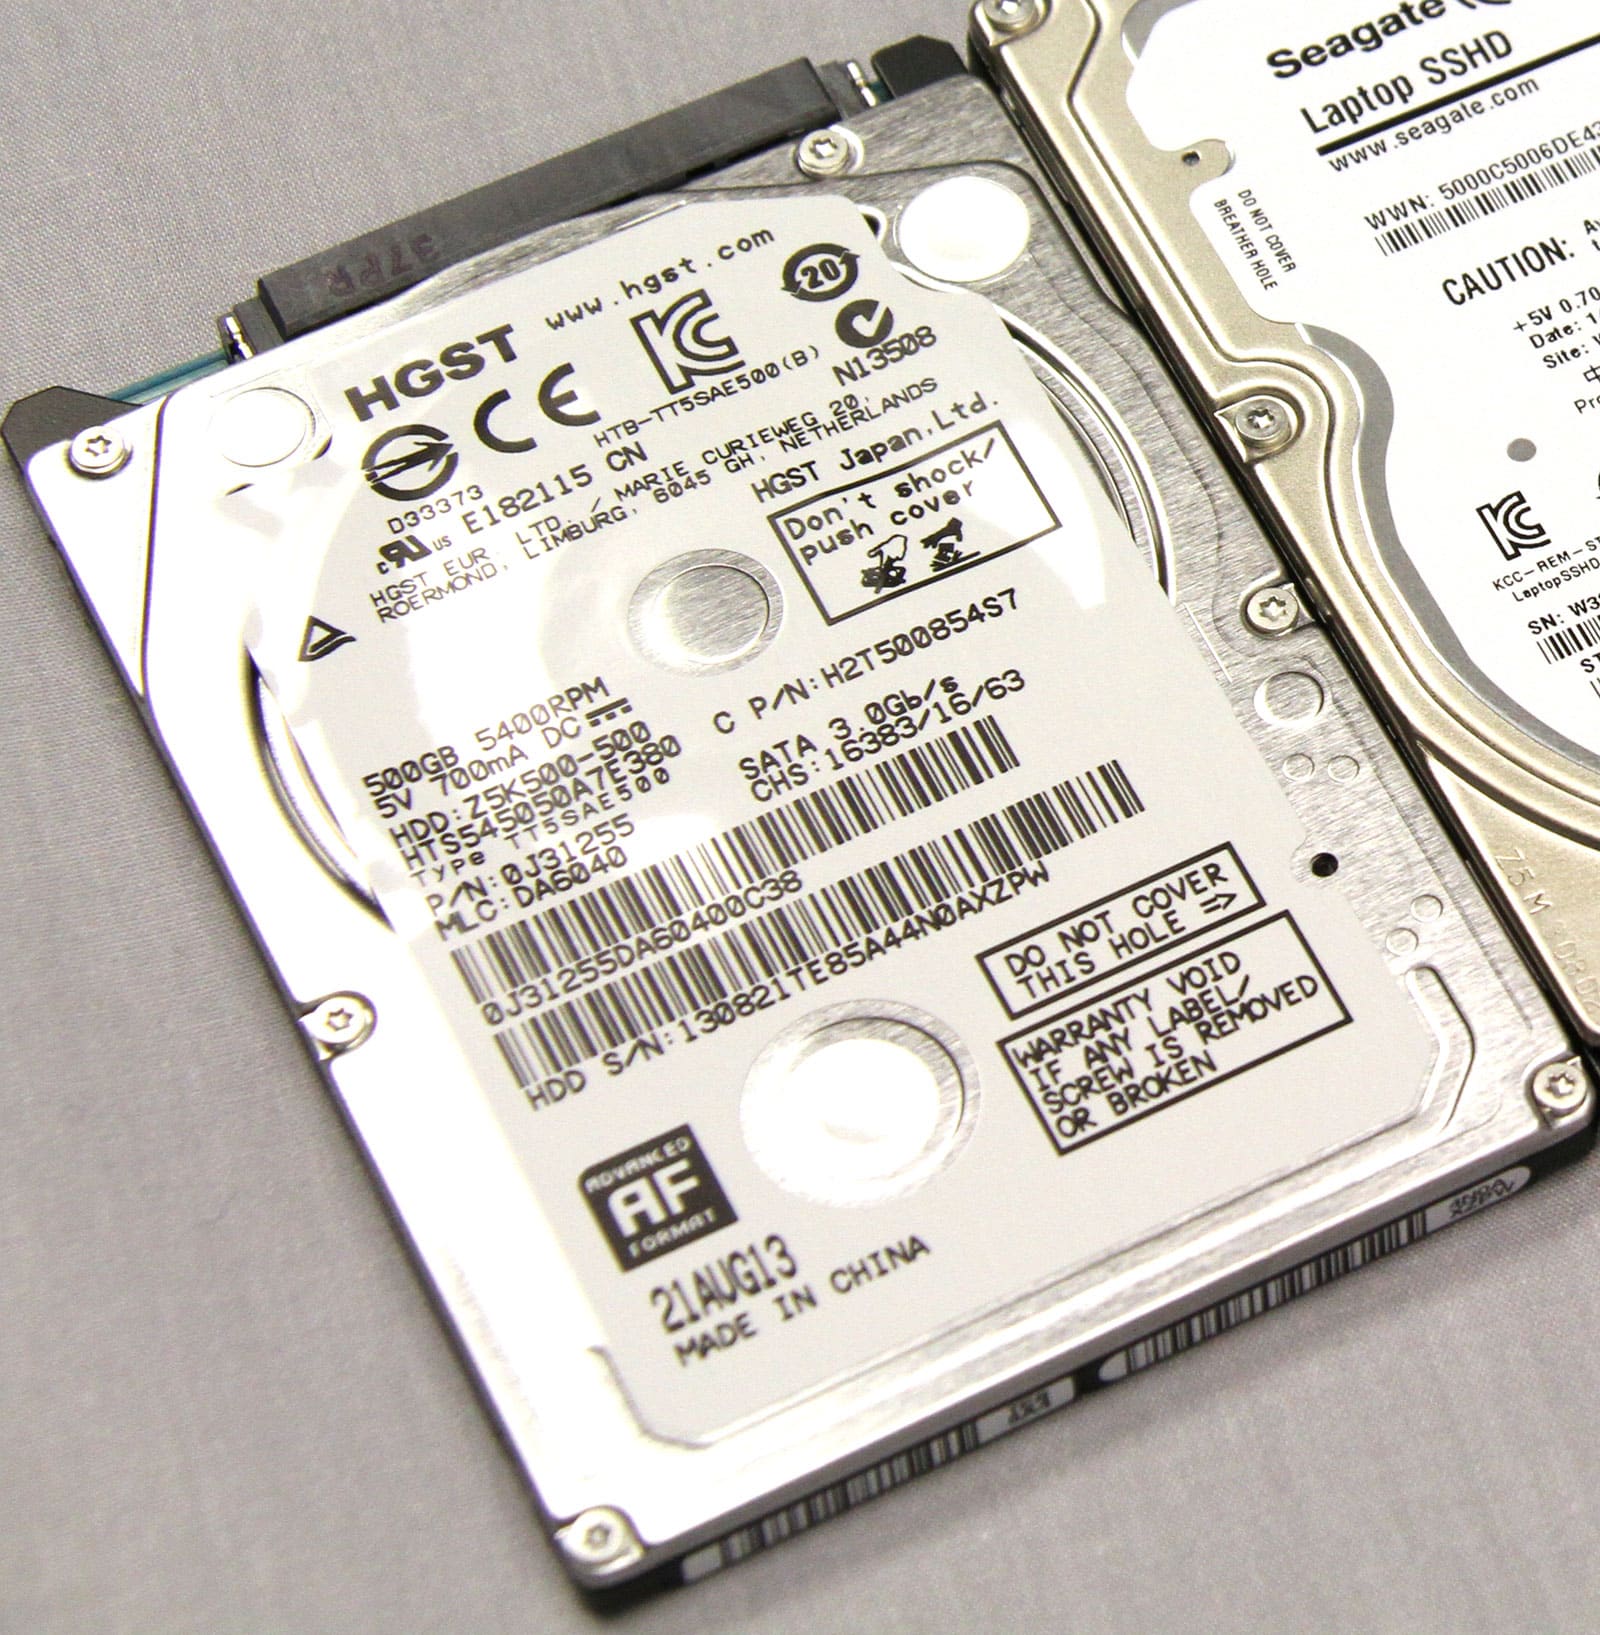 How To Fix Seagate Hard Drive Beeping Ps4 / This is a terrible issue ...